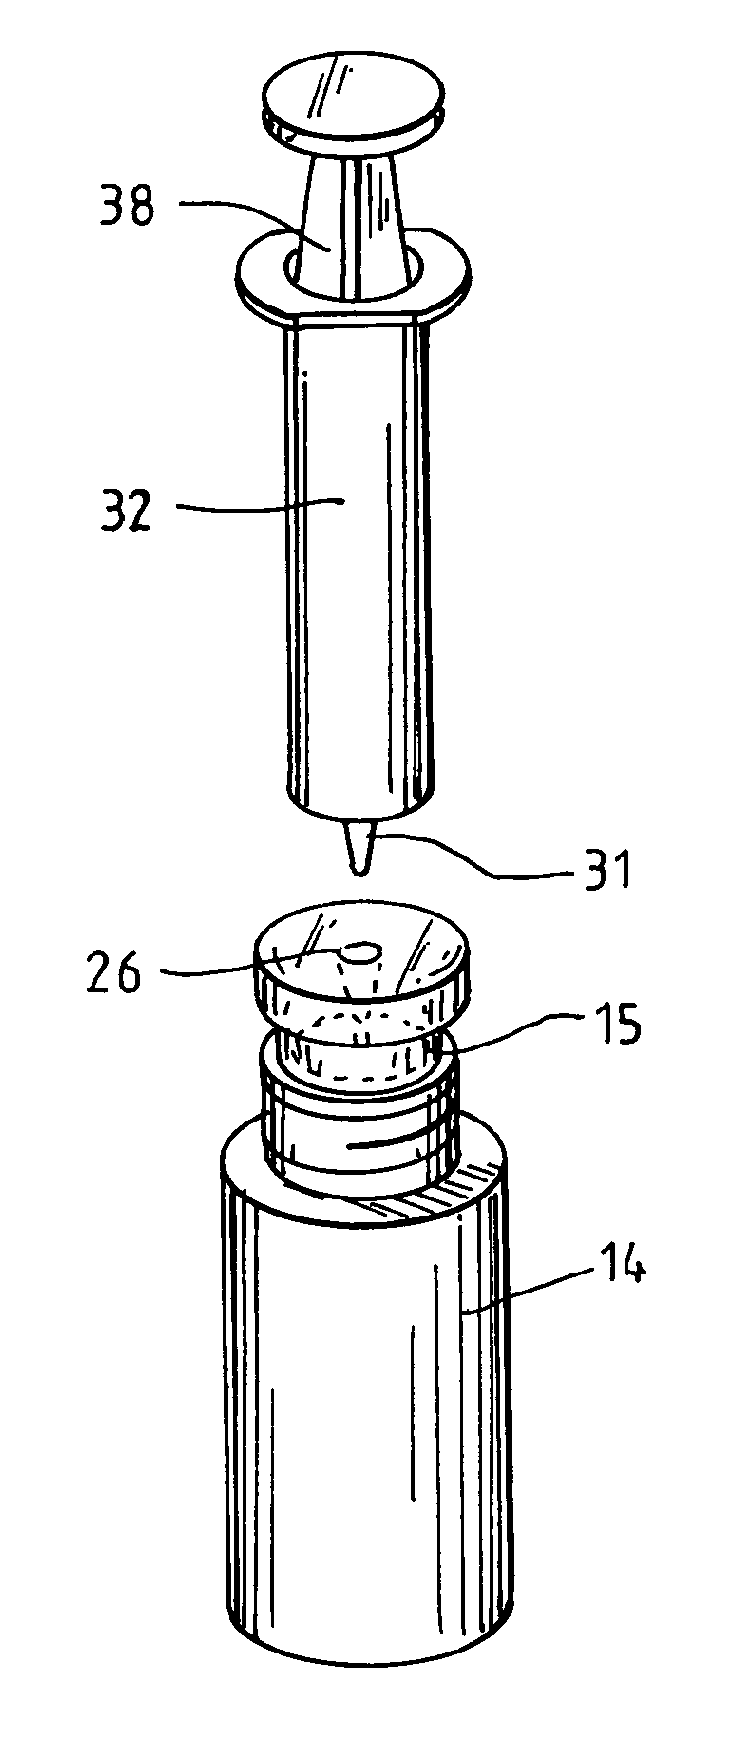 Closure and dispensing system